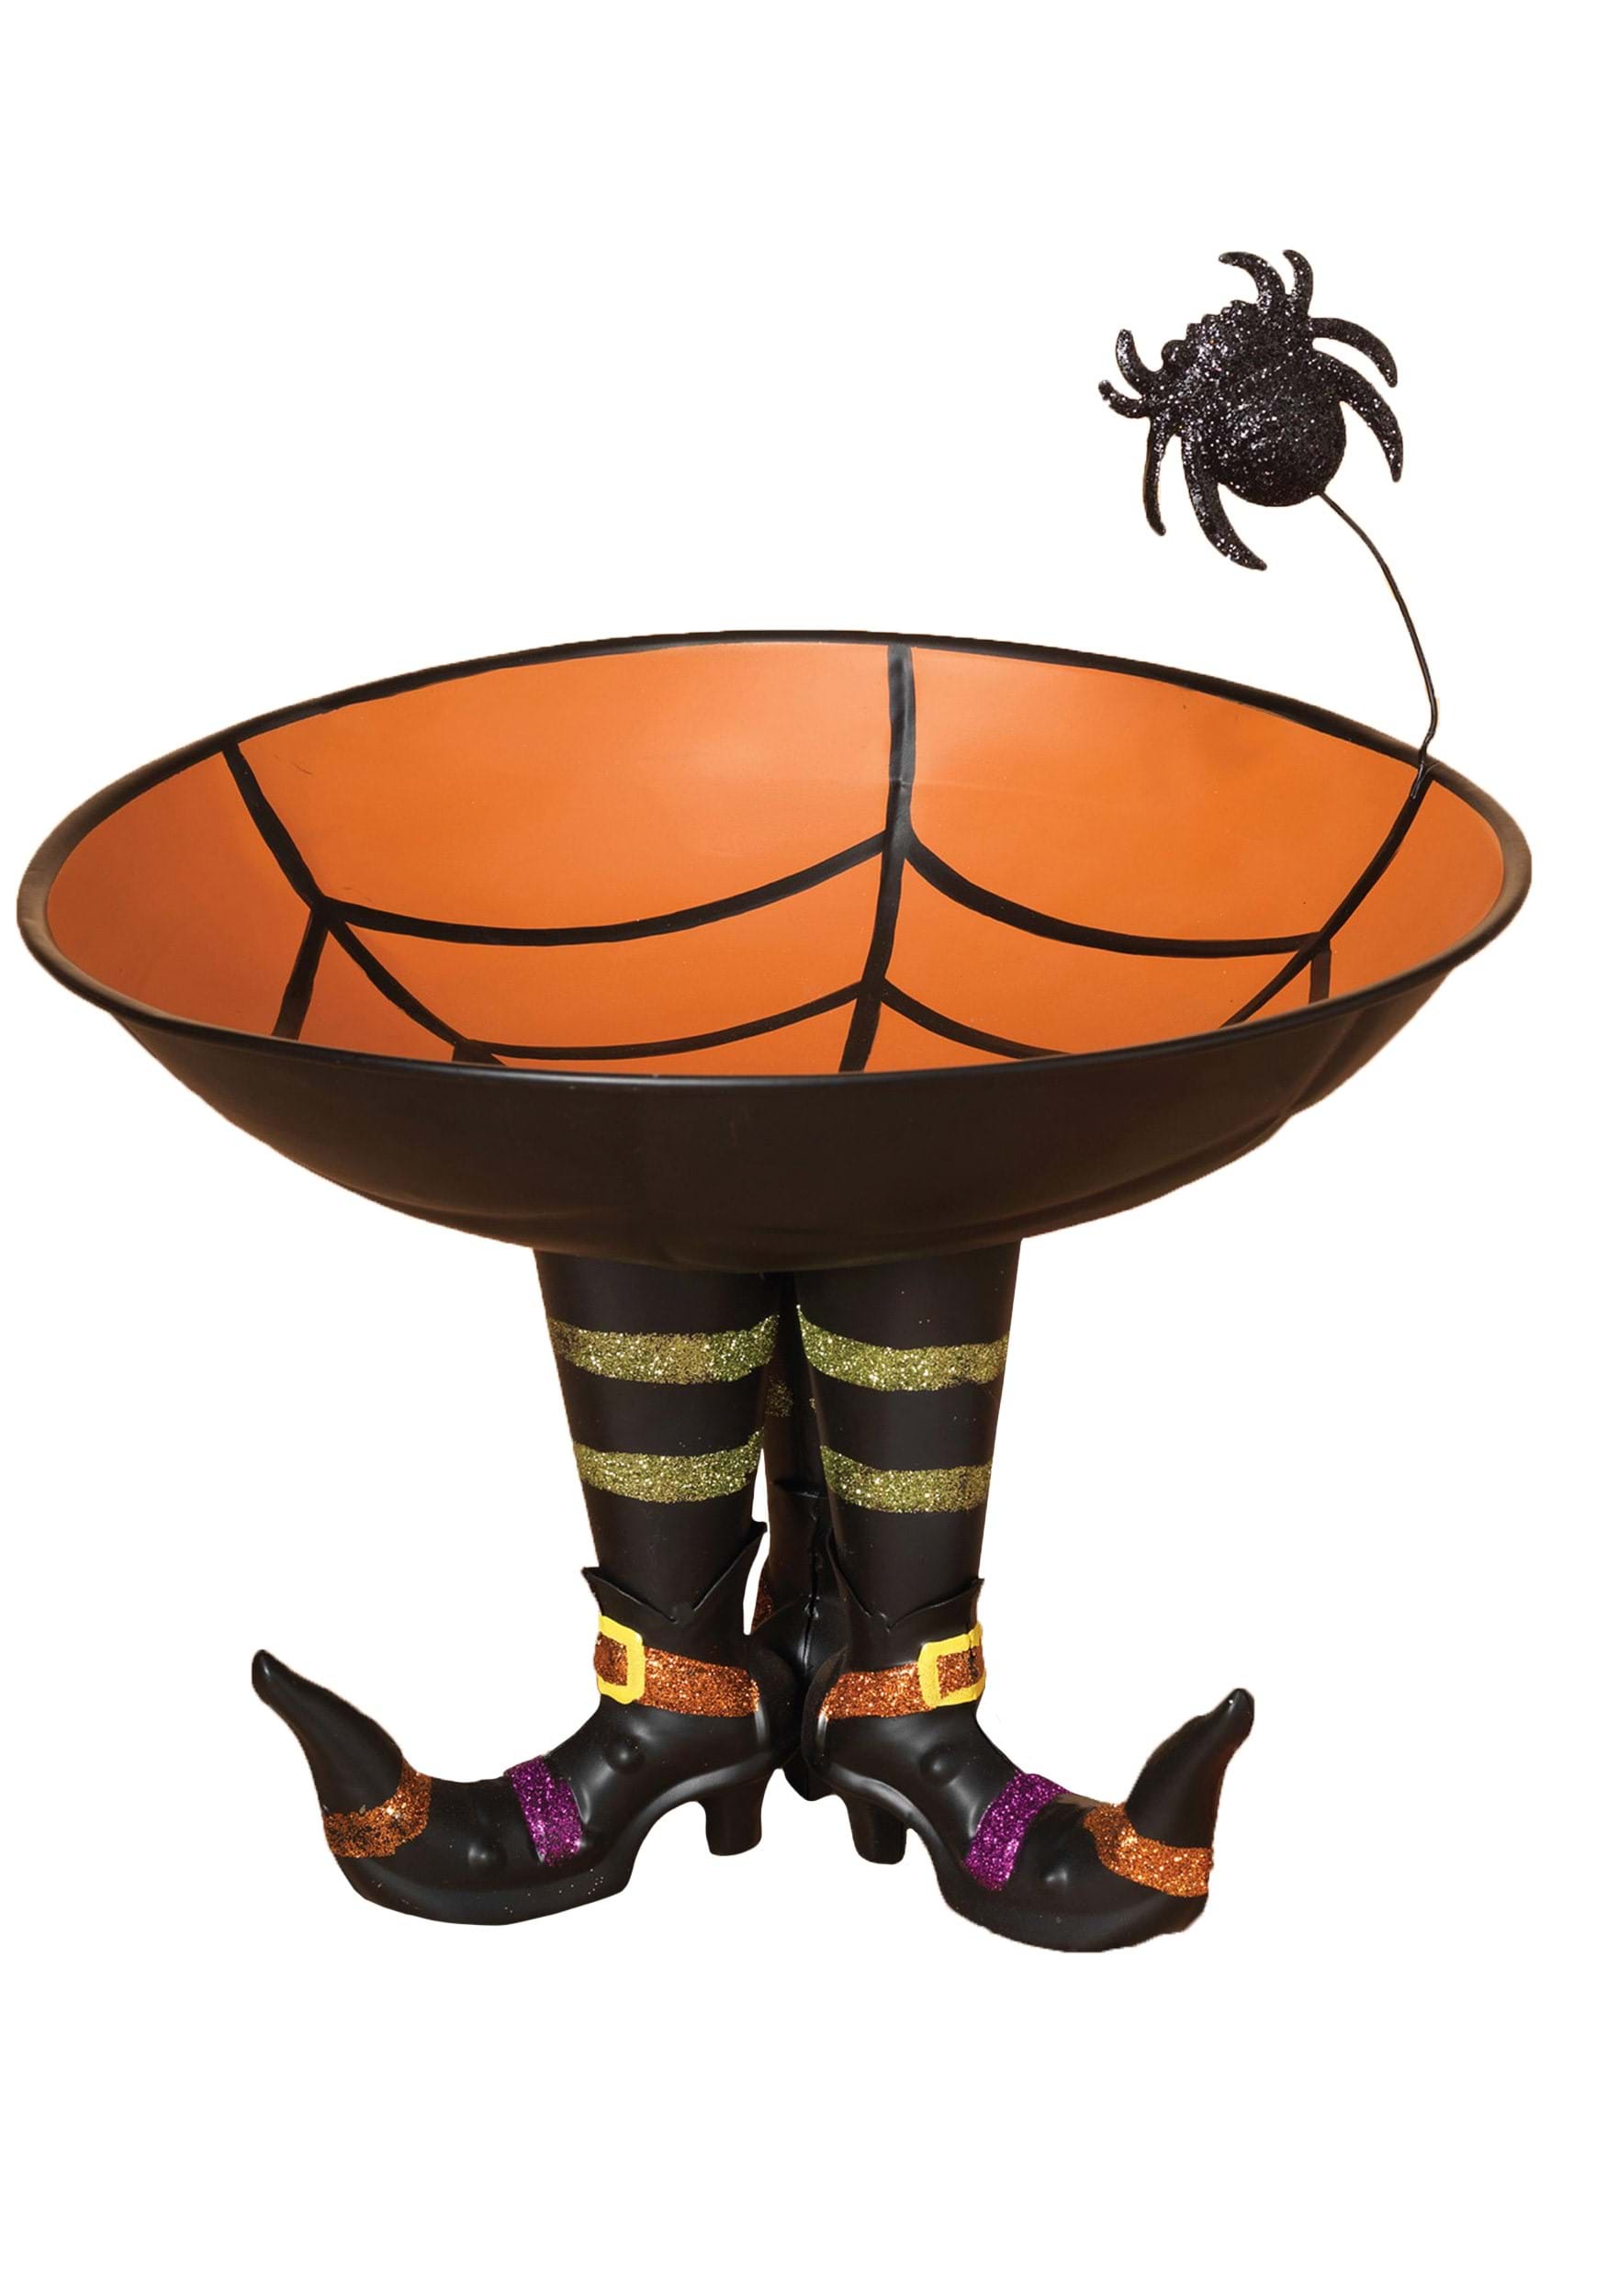 11" Metal Candy Bowl on Witch Boots with Spider Decoration